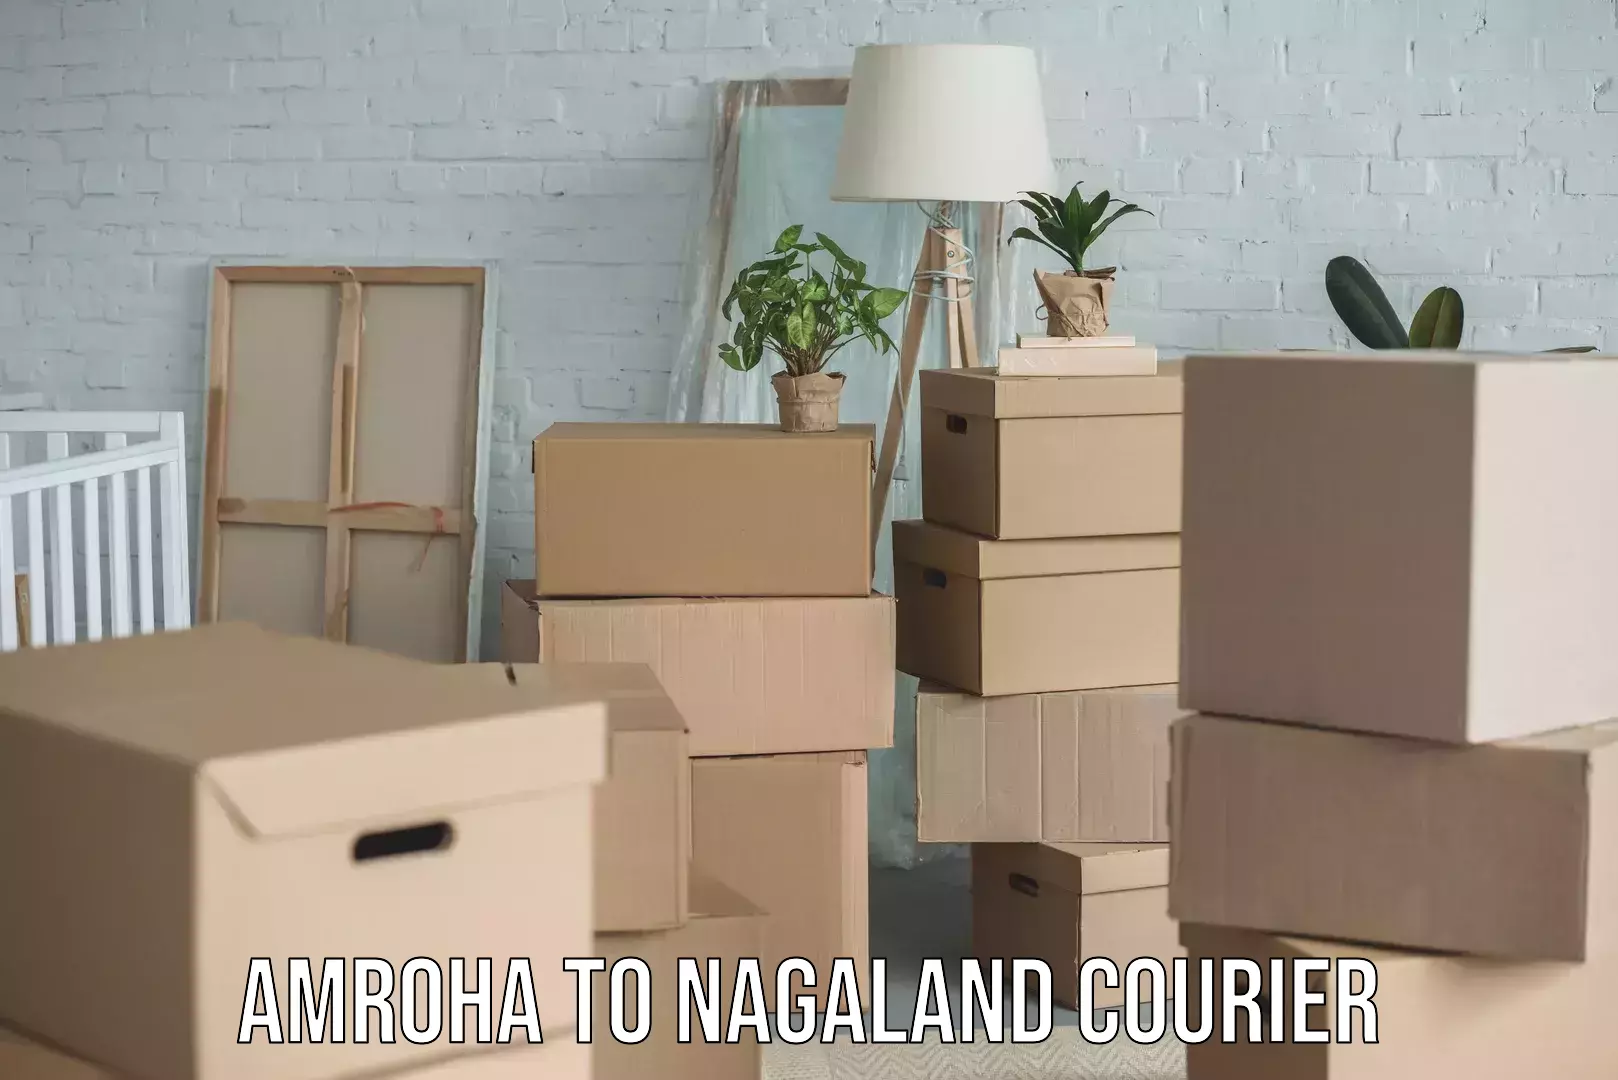 Supply chain delivery Amroha to Nagaland